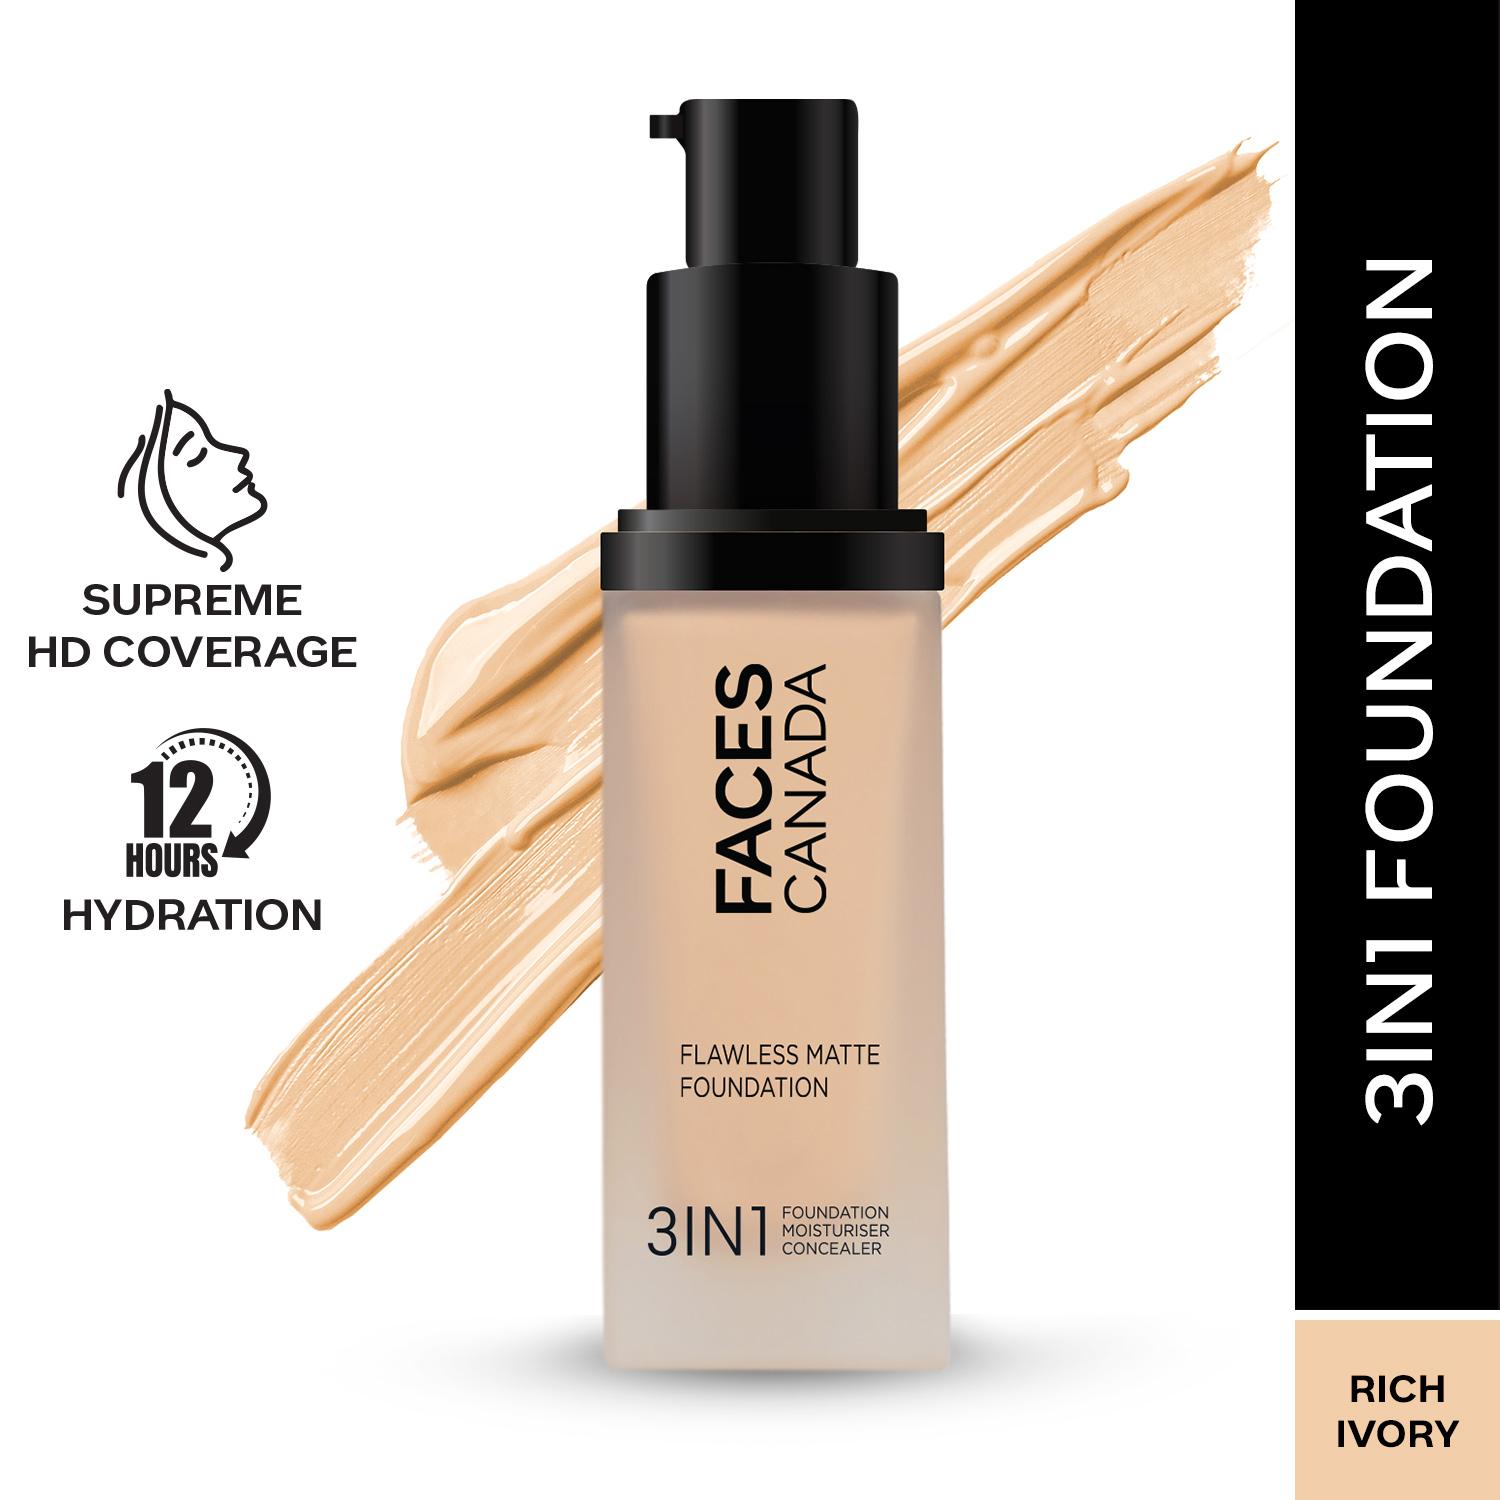 Faces Canada | Faces Canada 3-In-1 Flawless Matte Foundation SPF 18 - 013 Rich Ivory (30ml)